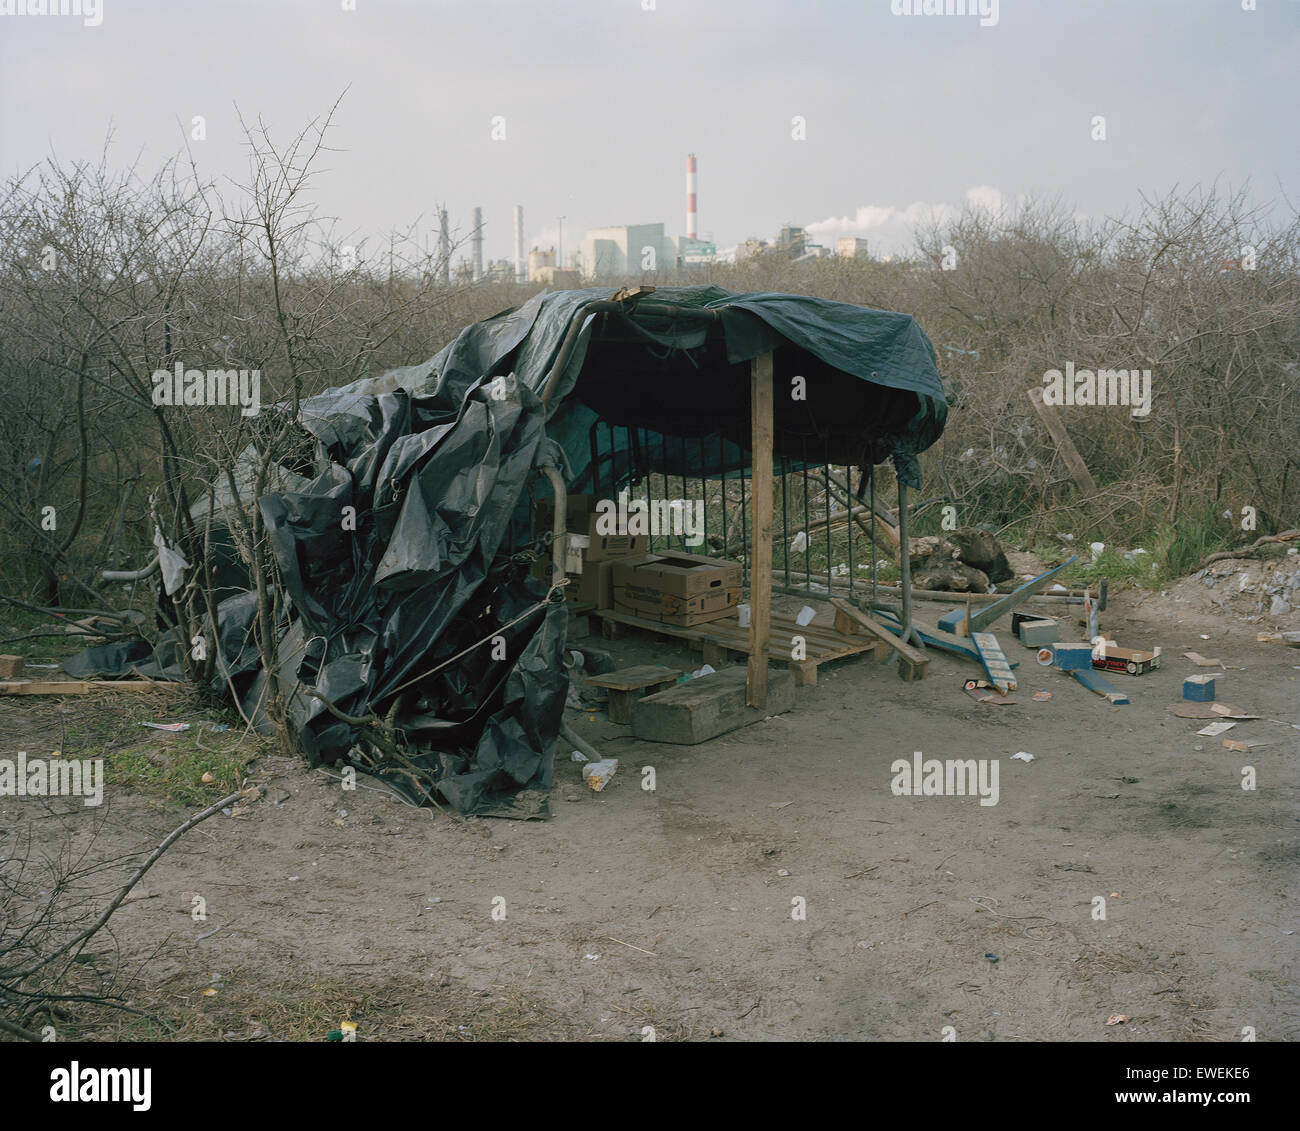 A makeshift tent made by migrants in the city of Calais, France Stock Photo